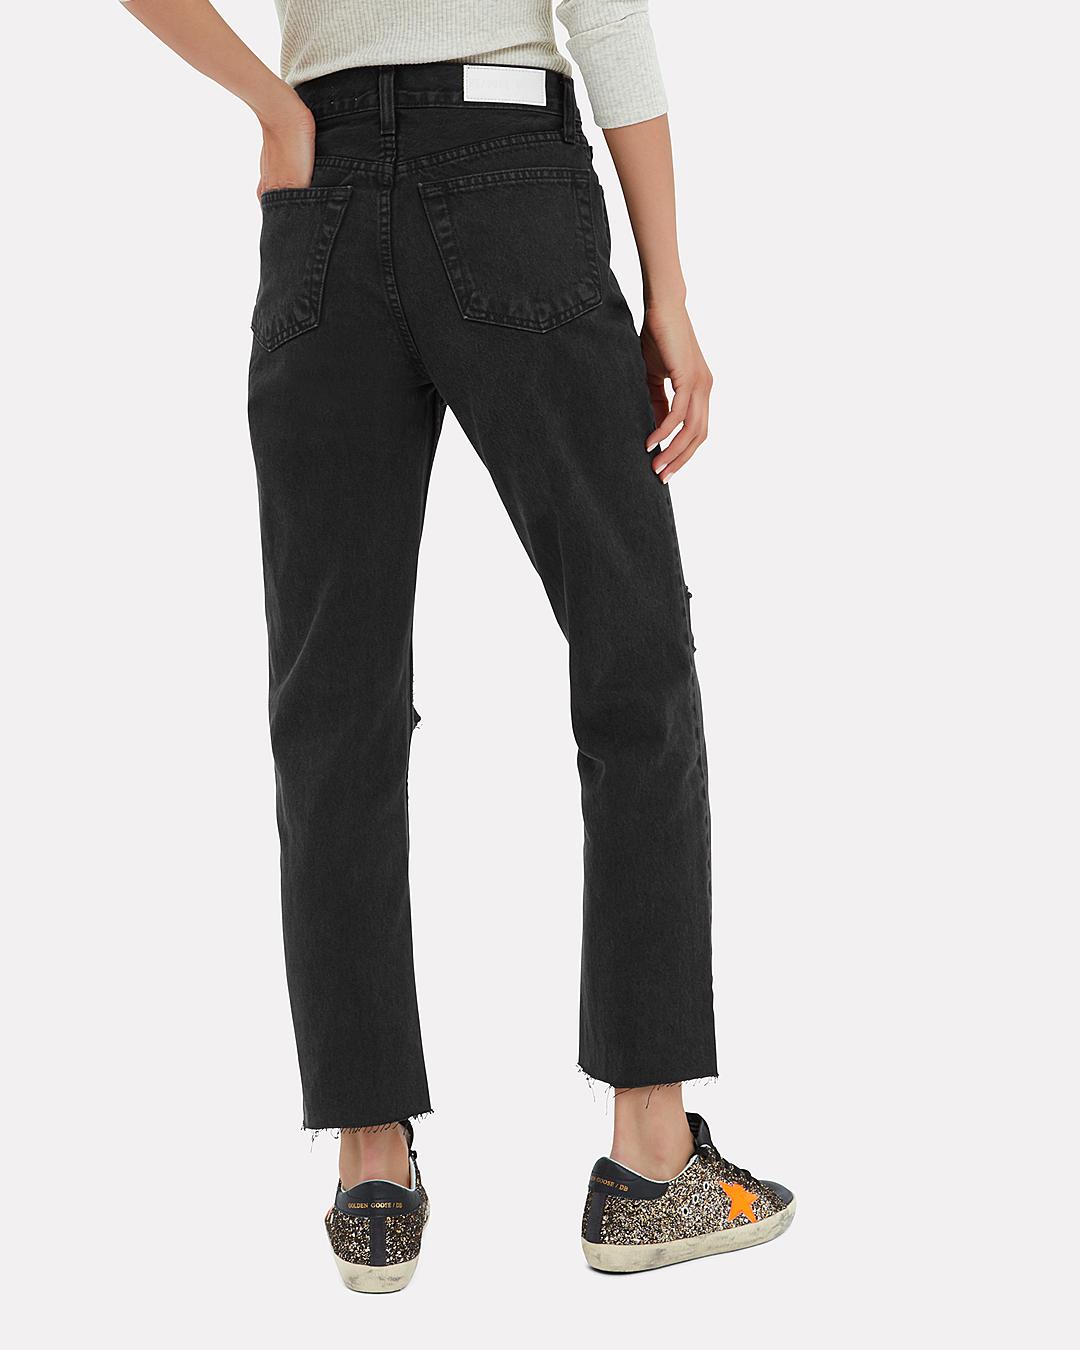 RE/DONE Denim Black Originals Stove Pipe Ripped Jeans - Lyst